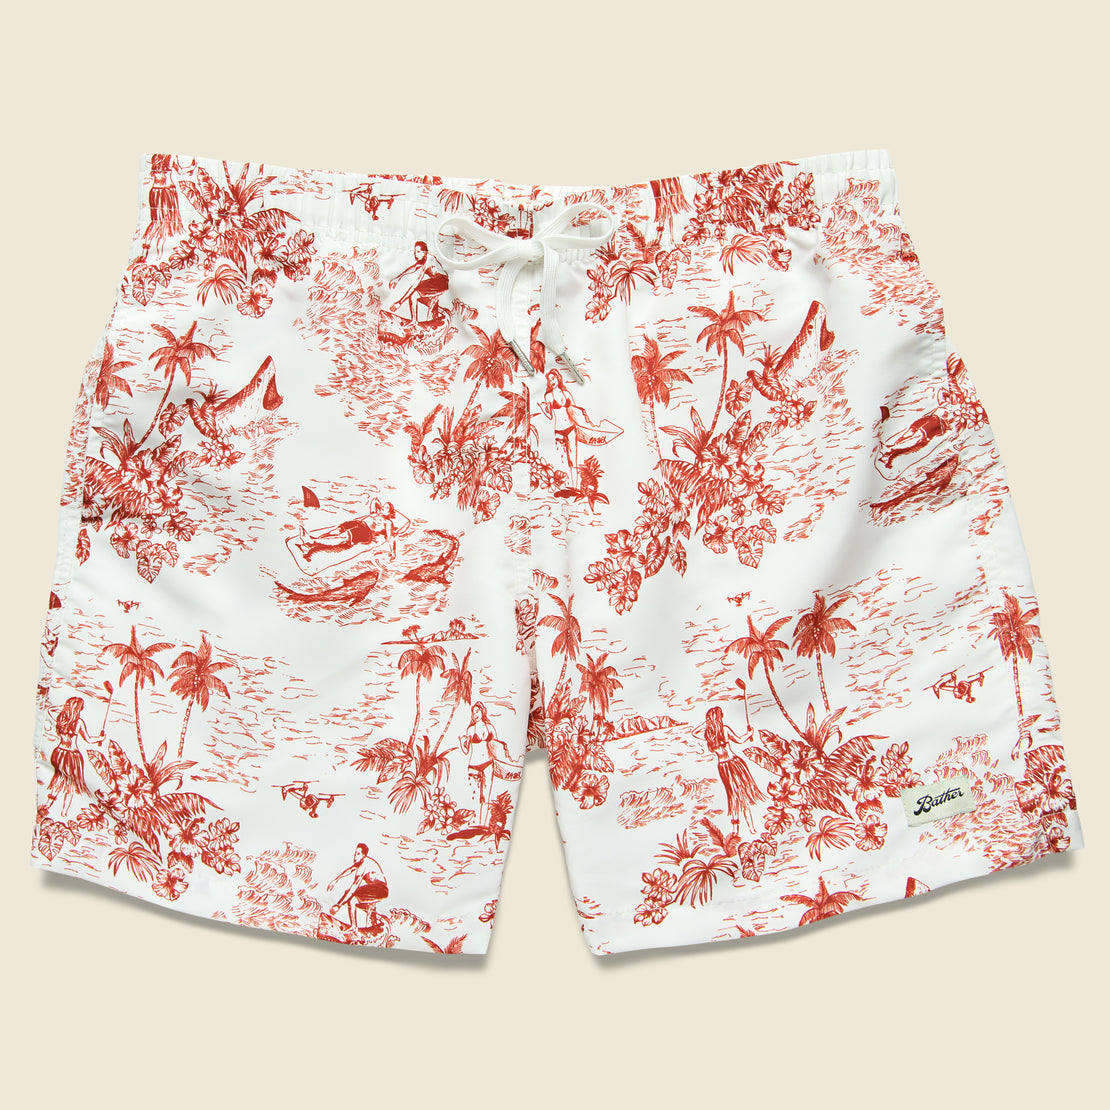 Bather Trunk Co. Canadian Toile Swim Trunk - Red/White